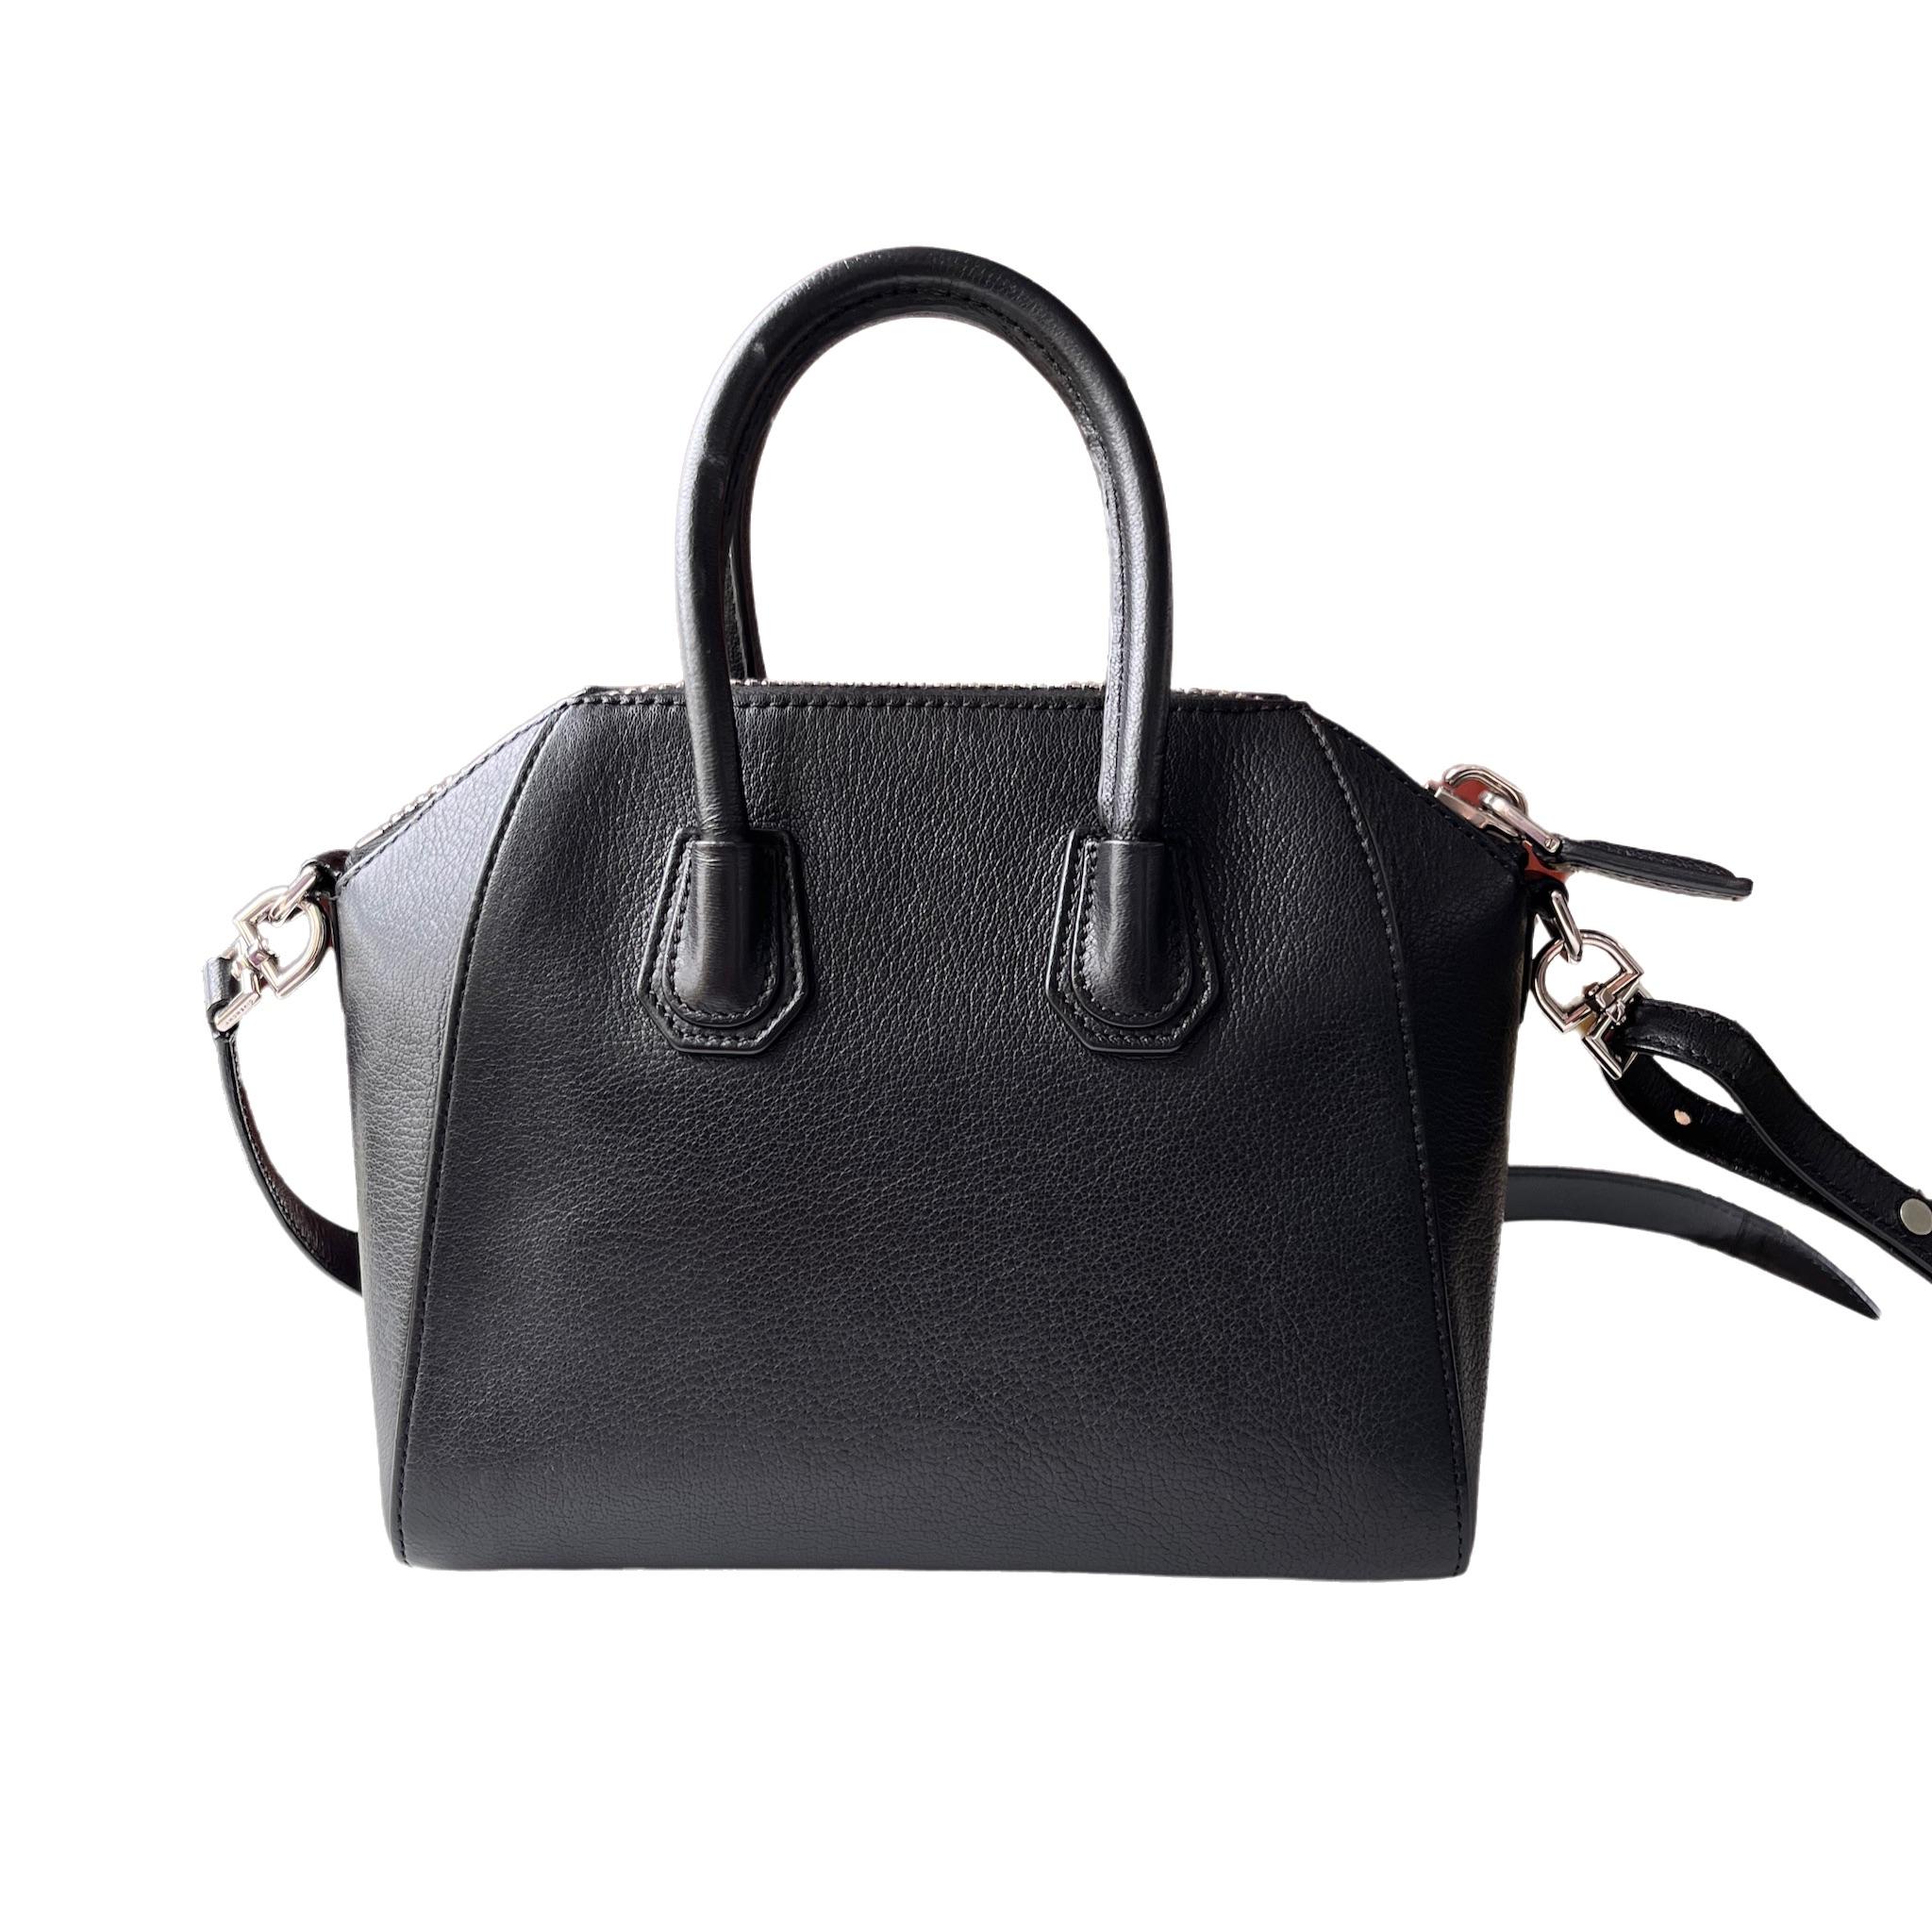 This iconic design boasts a roomy interior, perfect for carrying all your essentials. Crafted with high-quality and durable black leather. It features two top handles and a long removable shoulder strap, making it versatile and practical for any